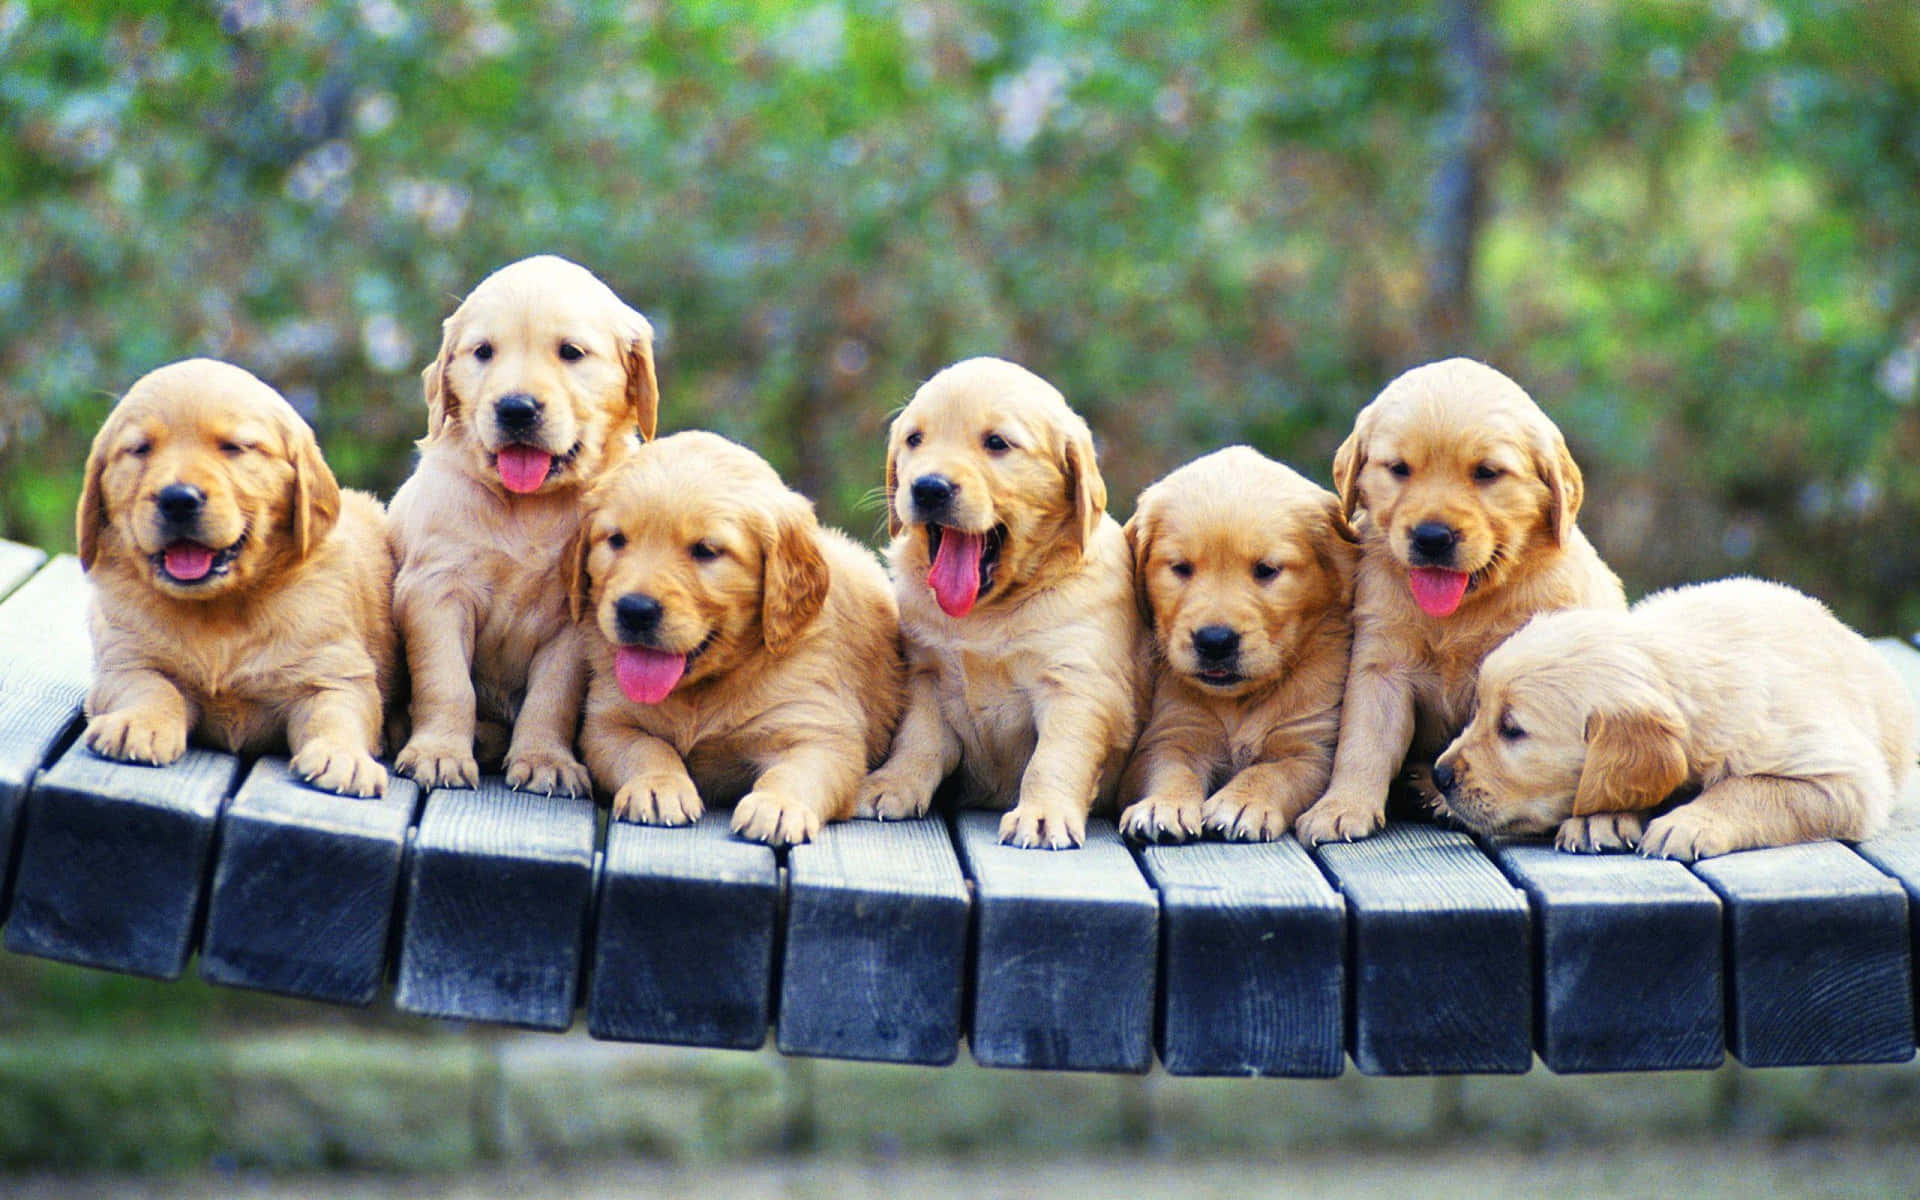 A Group Of Puppies On A Wooden Bench